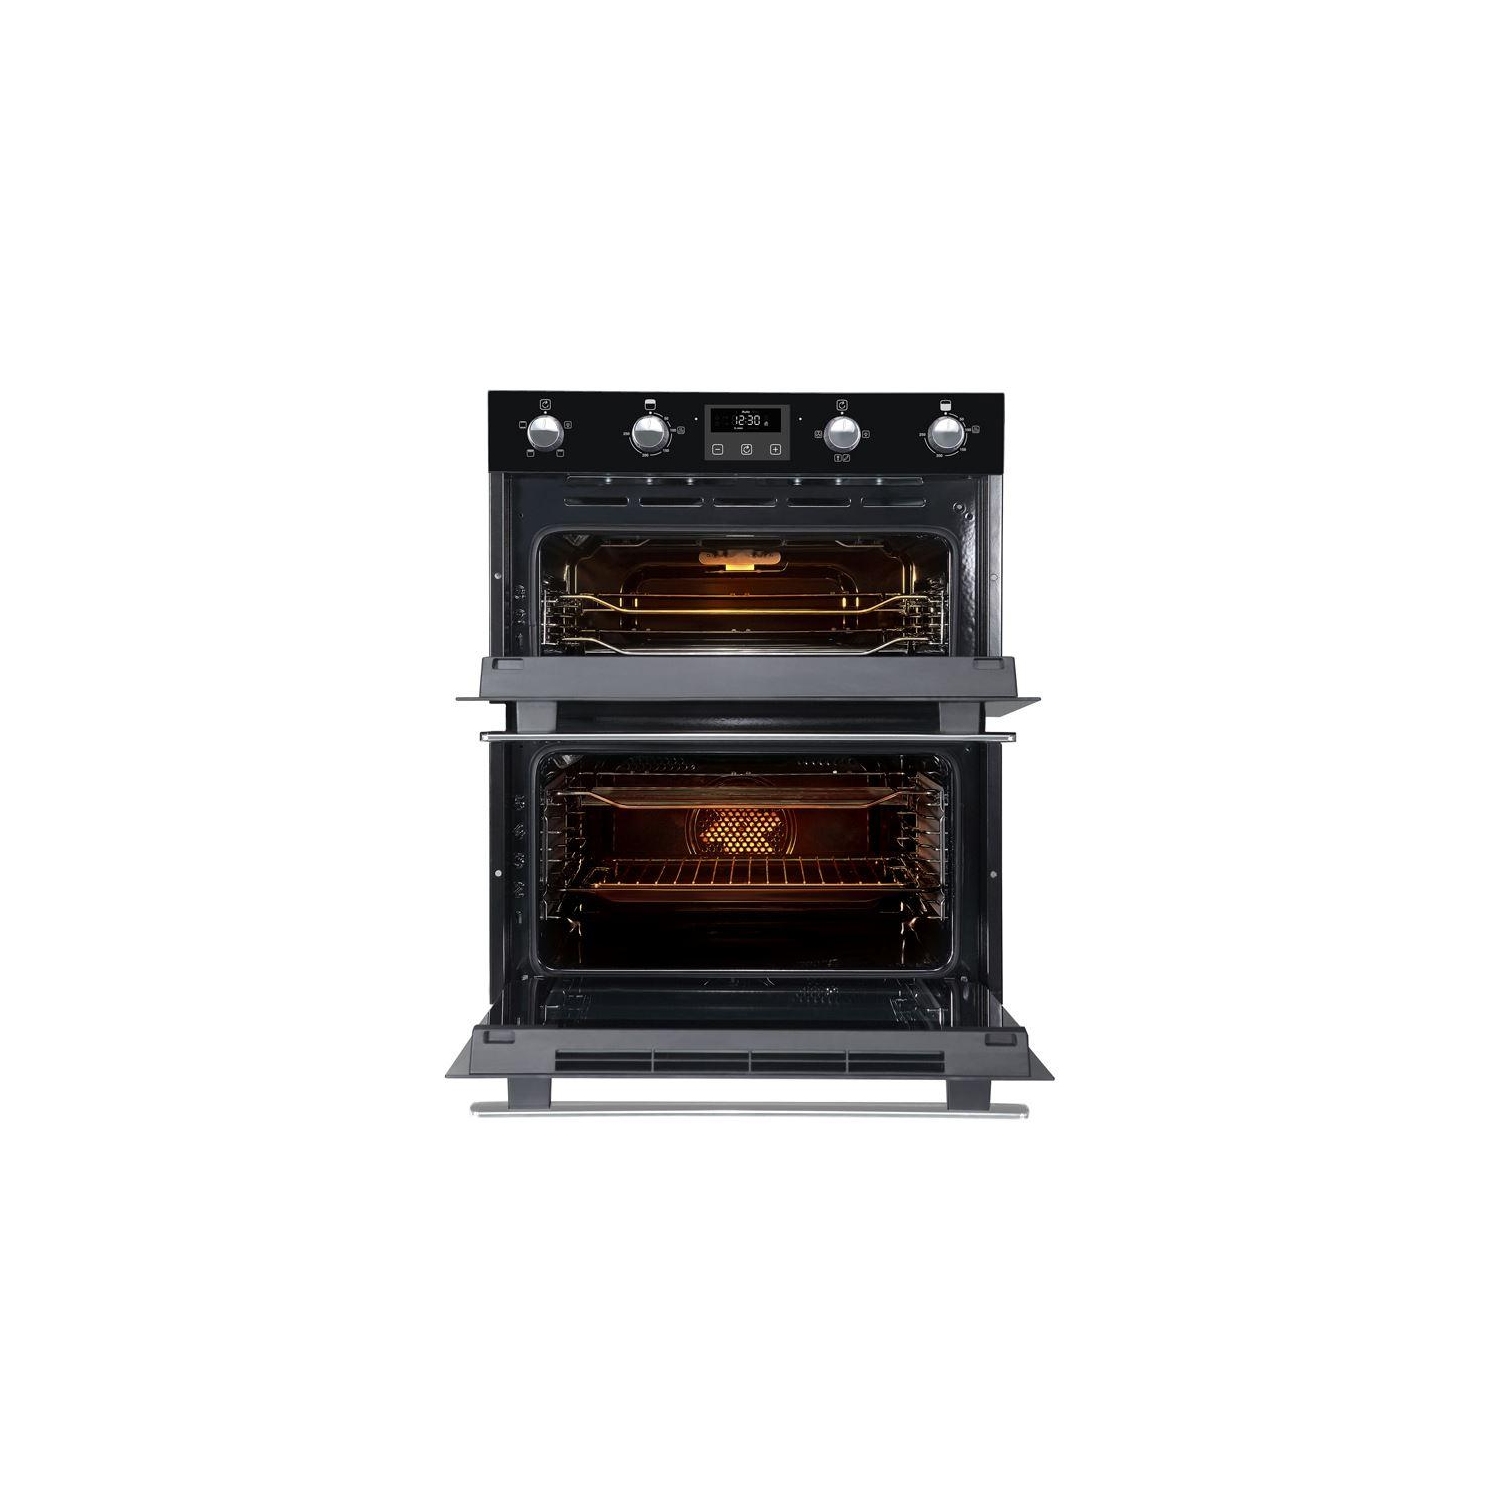 Belling 55cm Electric Double Oven - Stainless Steel - A Rated - 2